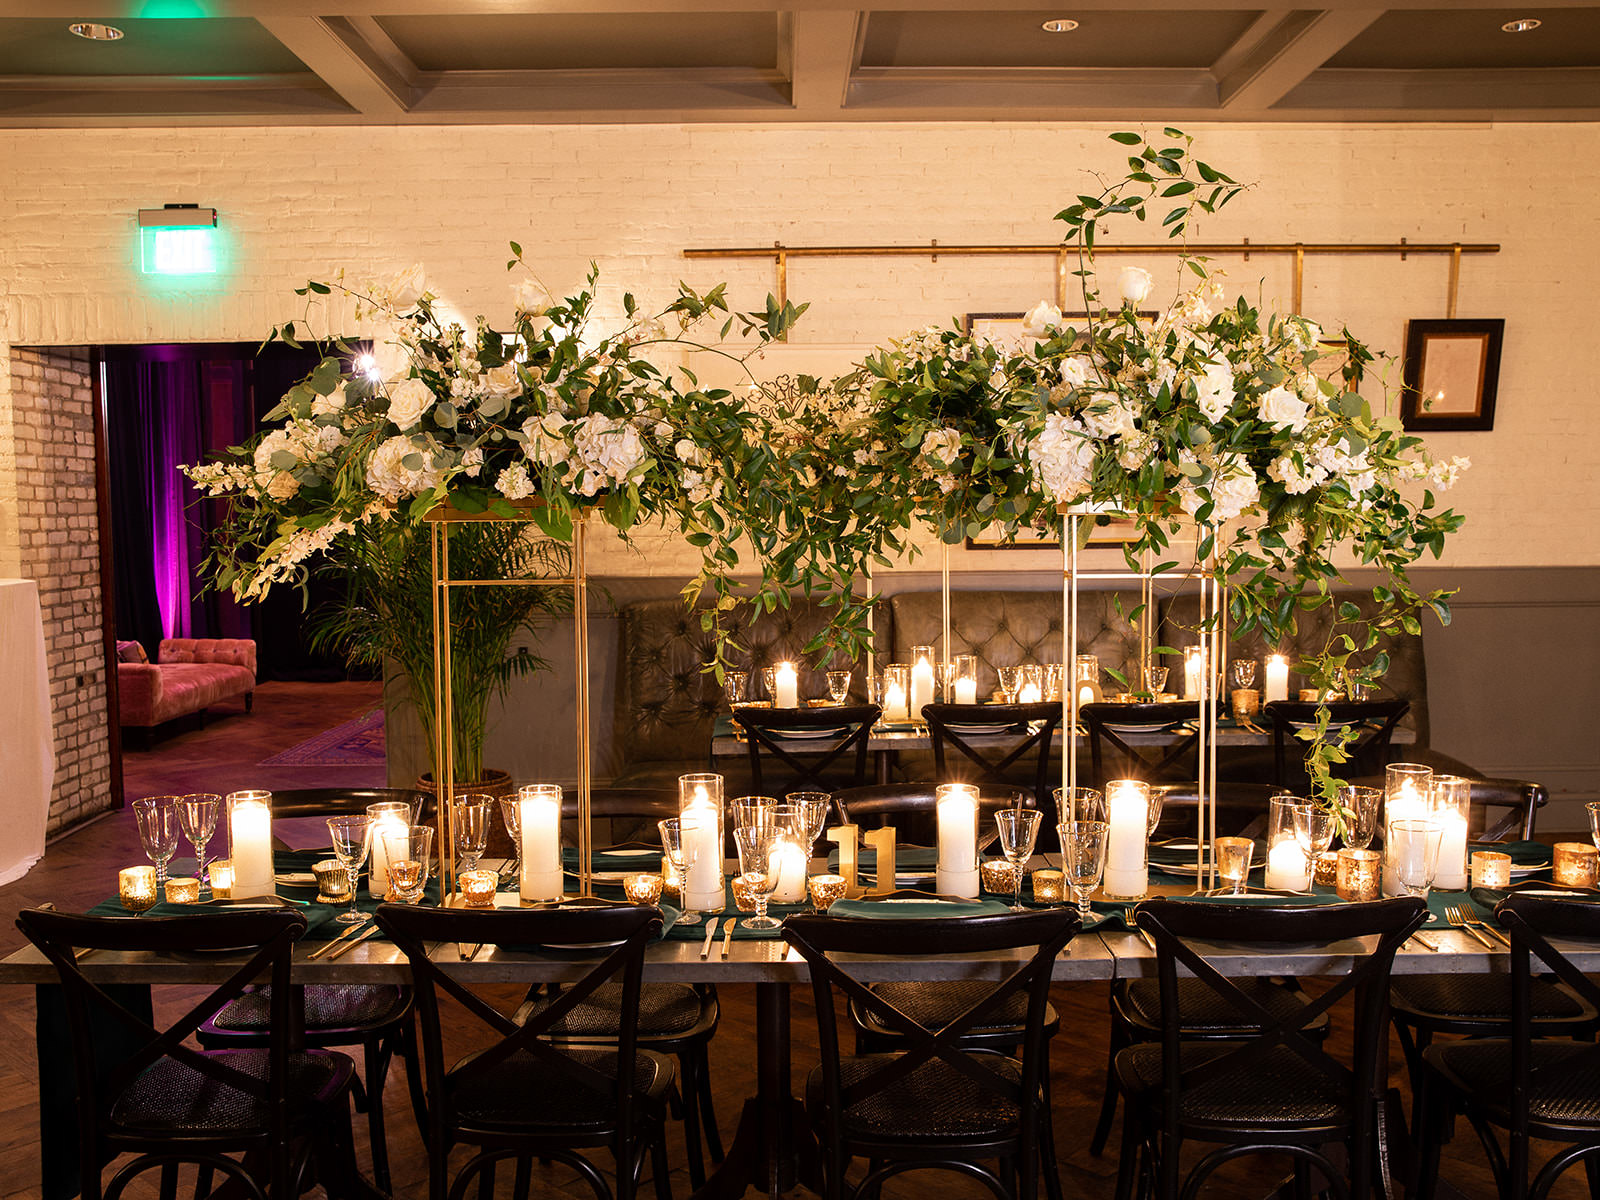 Classic Elegant Wedding Reception Decor, Long Feasting Tables, Black Cross Back Chairs, Green Linen Table Runners, Candles, Tall Gold Stands with Lush White Flowers and Greenery | Tampa Bay Wedding Florist Botanica | Wedding Venue Oxford Exchange | A Chair Affair Rentals